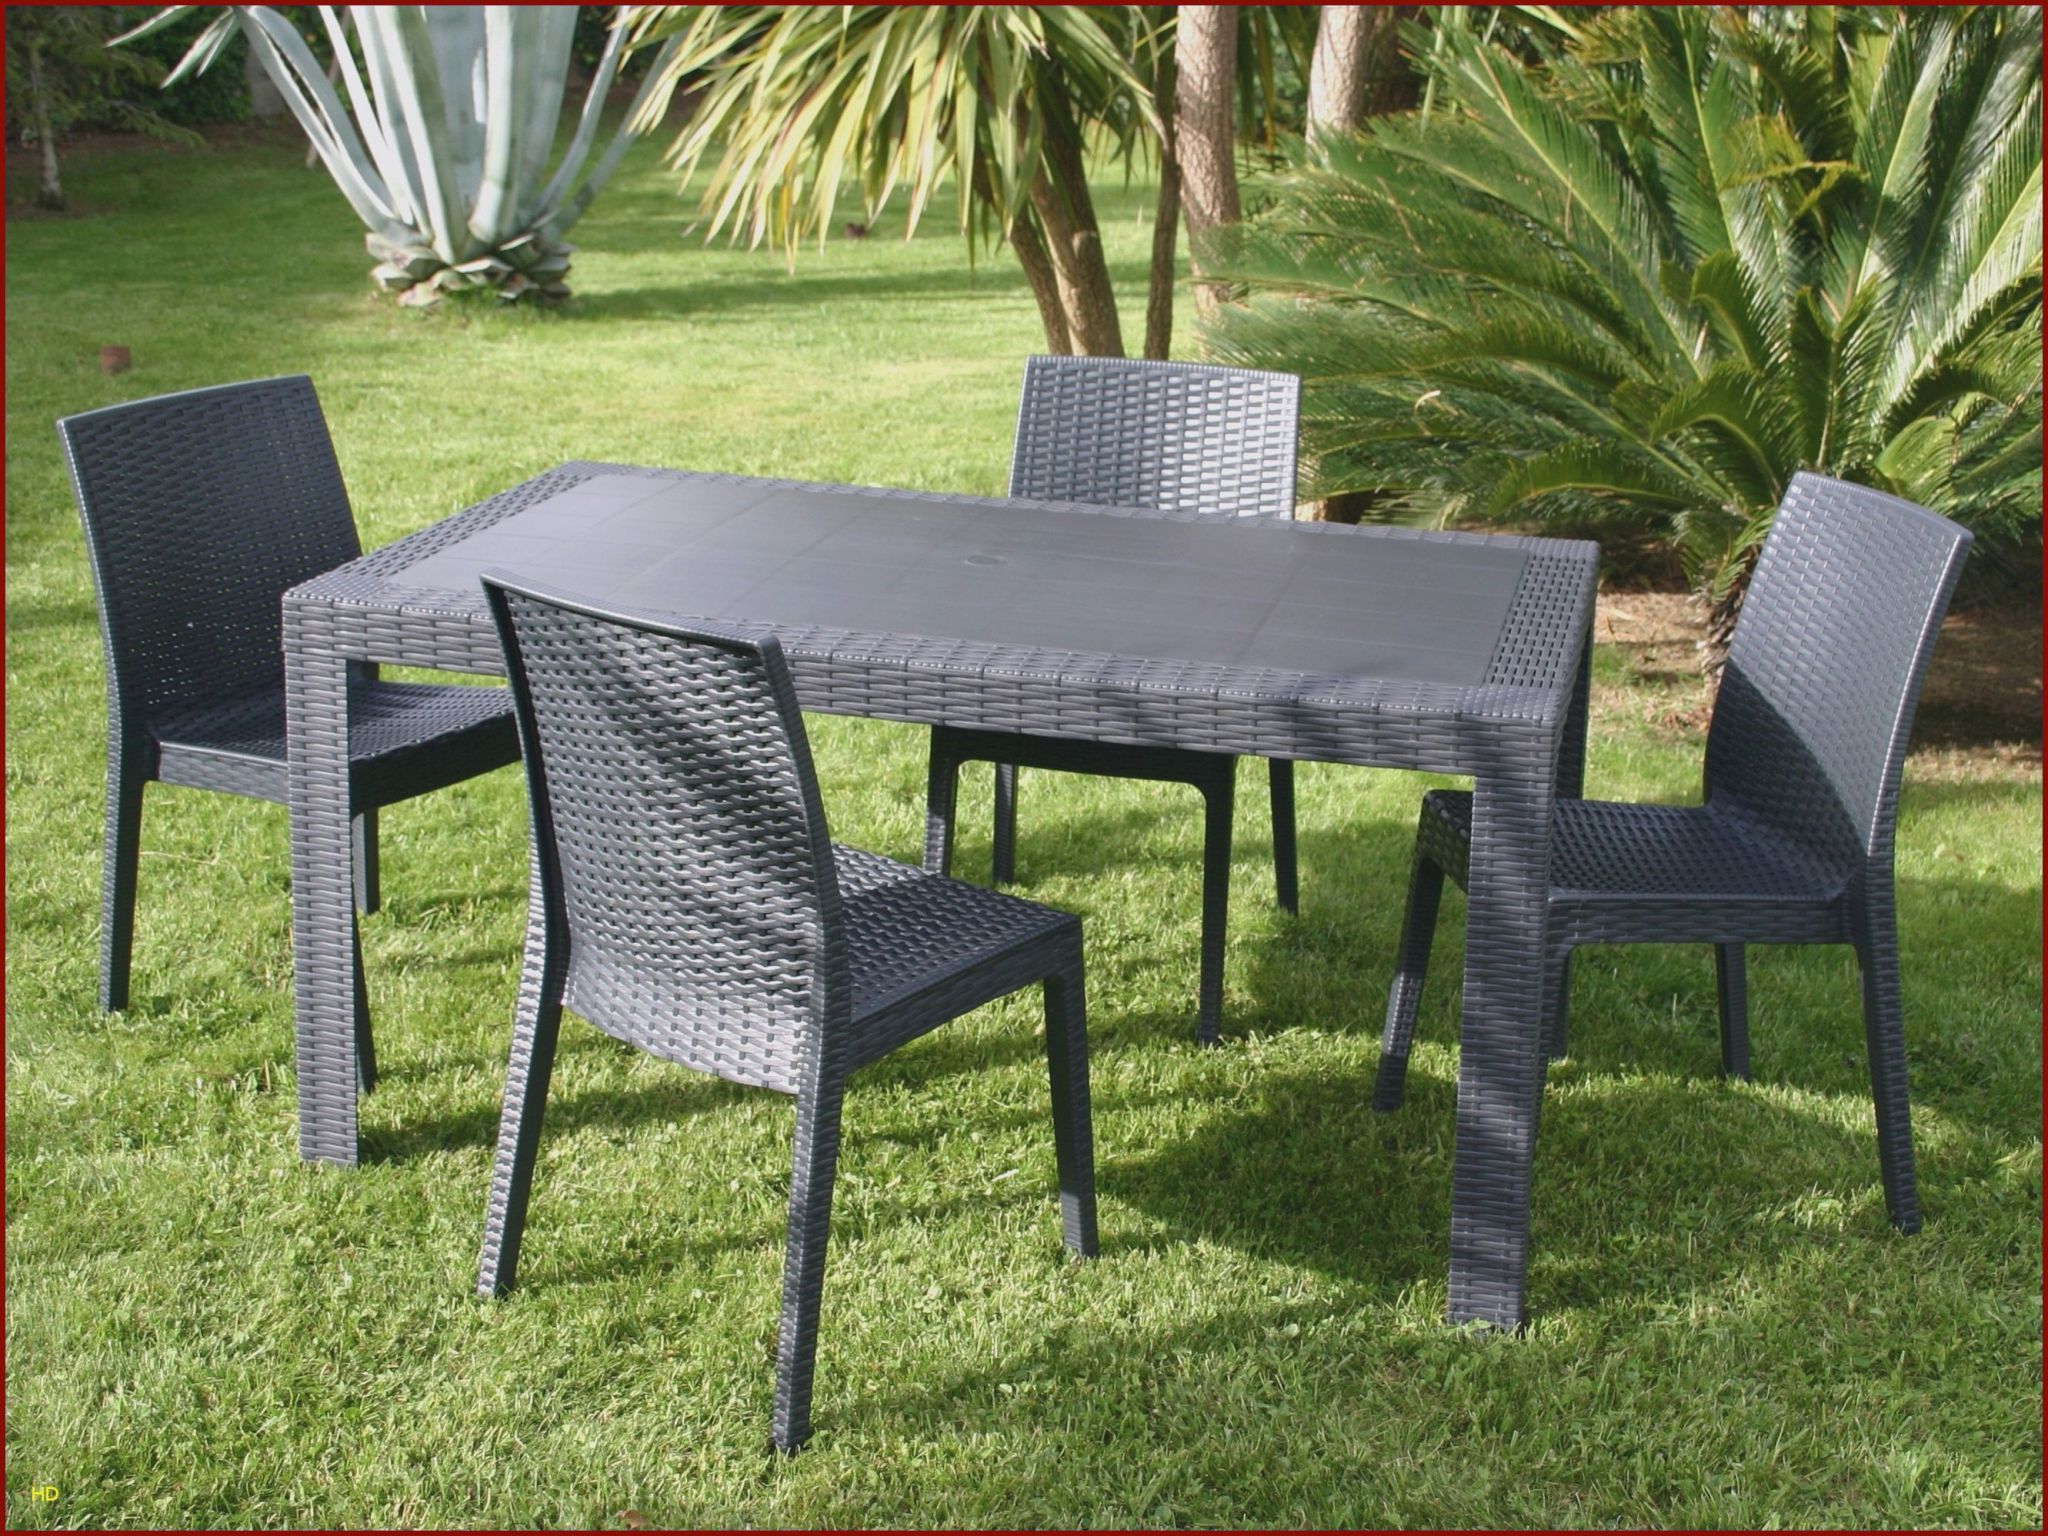 Promo Chaise Inspirant Chaises Luxe Chaise Ice 0d Table Jardin Resine Lovely